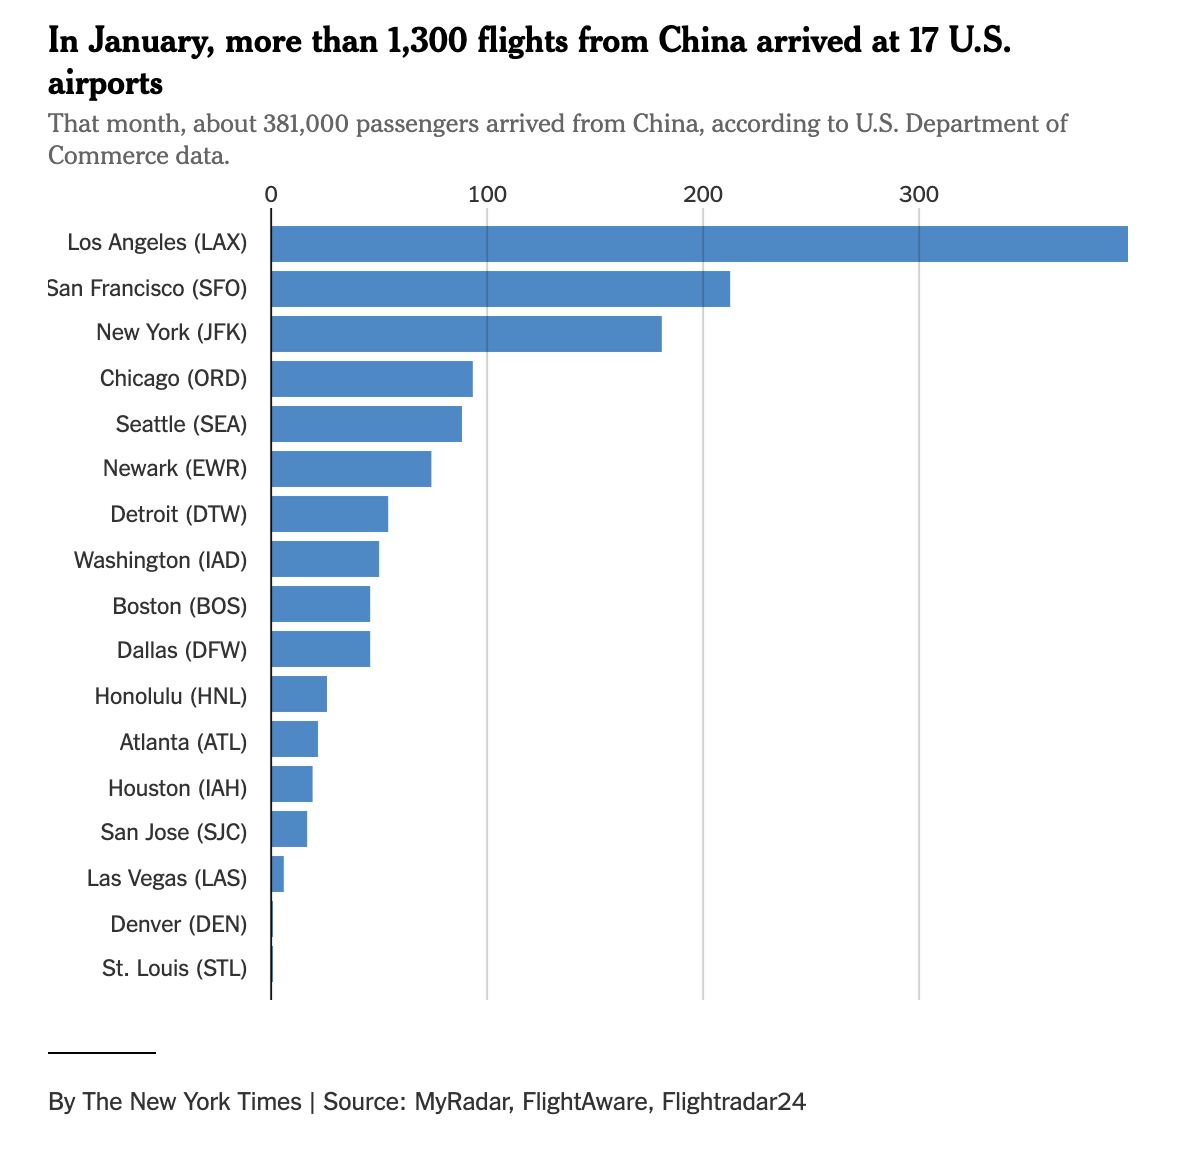 The bulk of the passengers arrived in January, at airports in LA, San Francisco, New York, Chicago, Seattle, Newark and Detroit. Thousands of travelers flew directly from Wuhan as American public health officials were only beginning to assess the risks to the U.S.